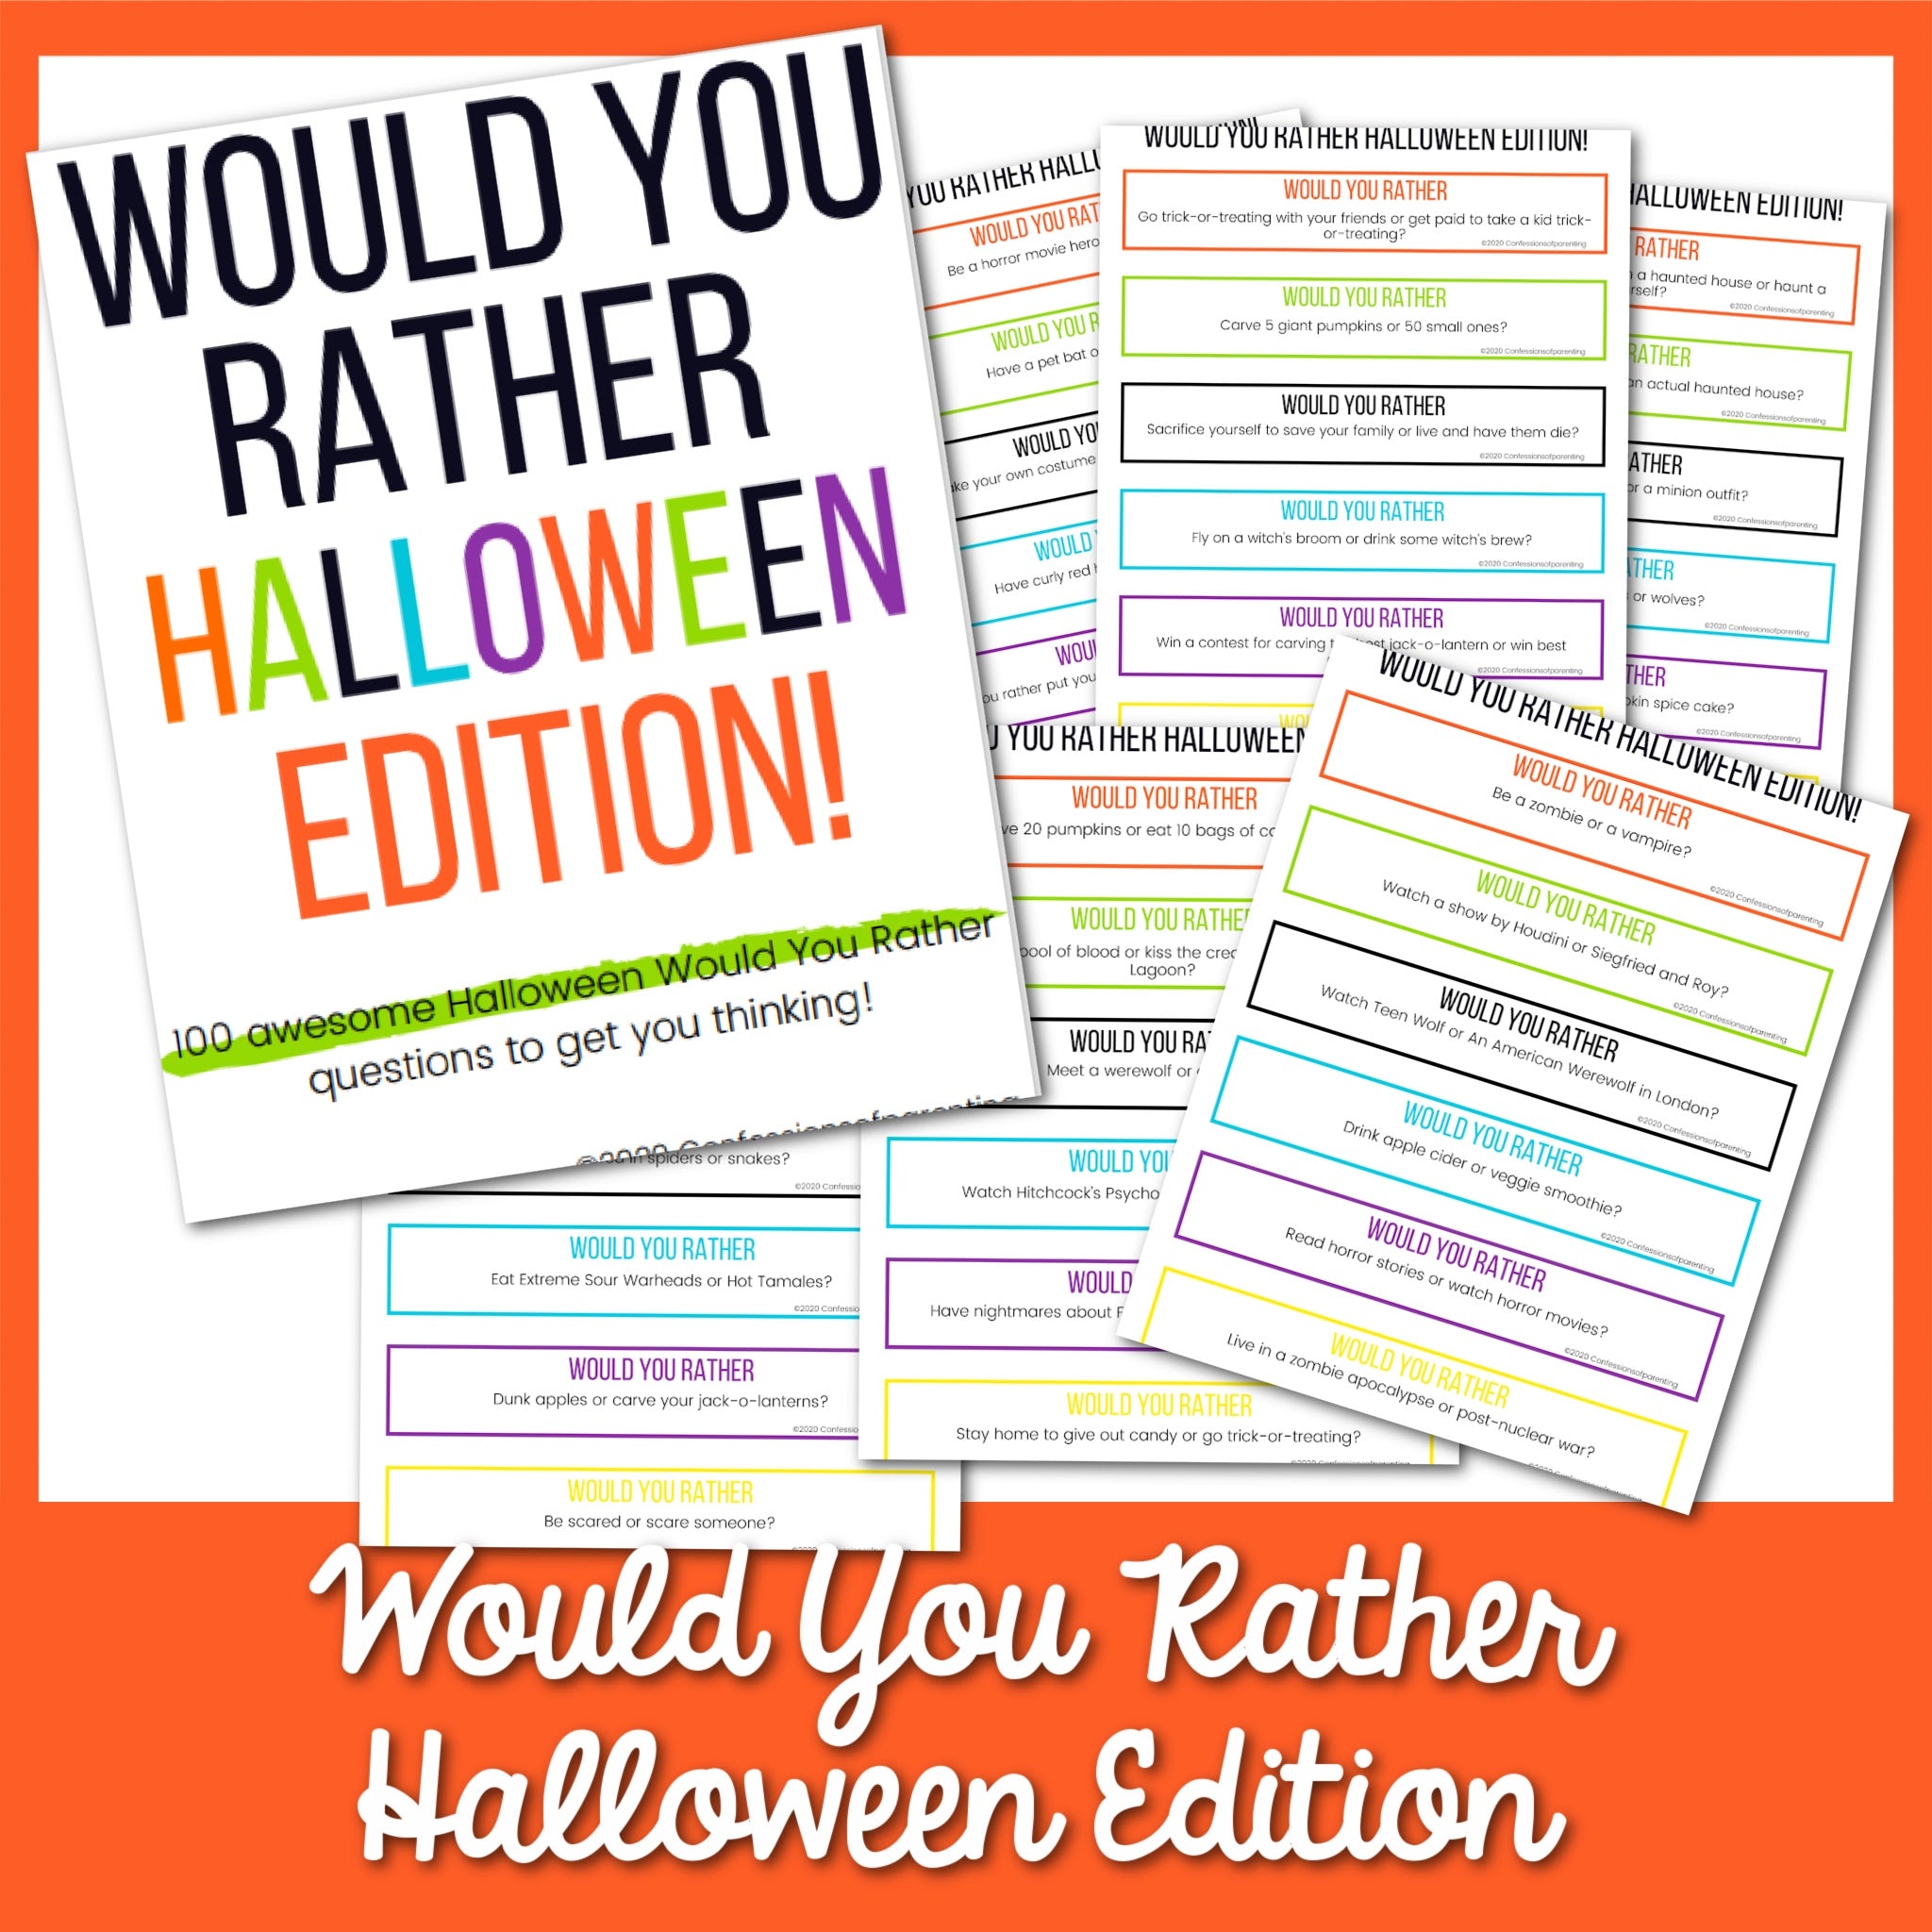 100 Halloween Would You Rather Questions